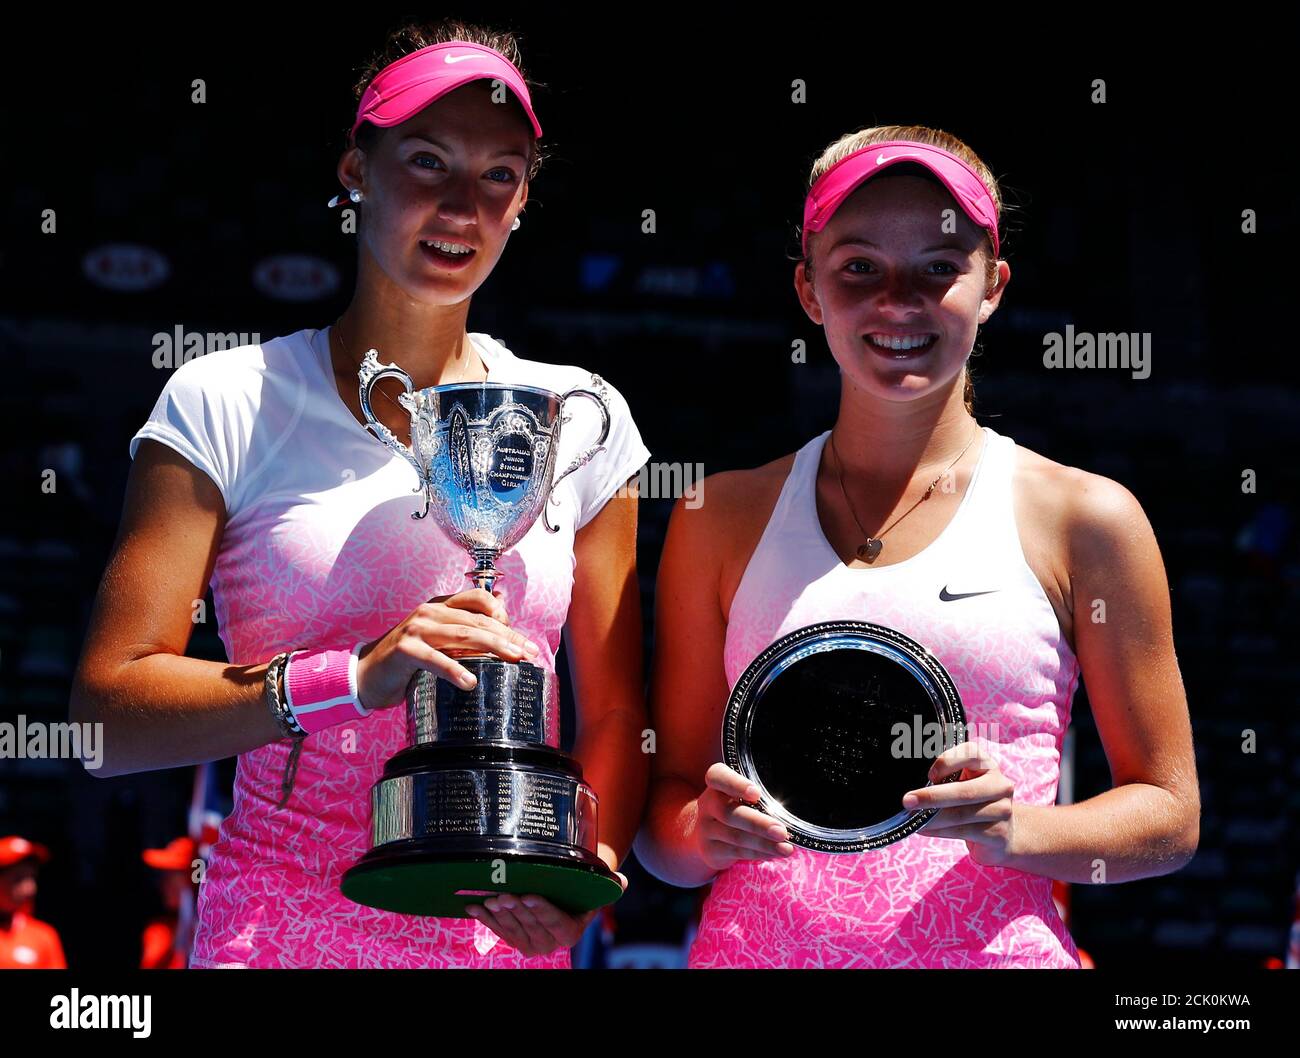 Tereza Mihalikova (L) of Slovakia and Katie Swan of Britain pose with their trophies after their junior girls' singles final match at the Australian Open 2015 tennis tournament in Melbourne January 31, 2015.  REUTERS/Thomas Peter (AUSTRALIA  - Tags: SPORT TENNIS) Stock Photo